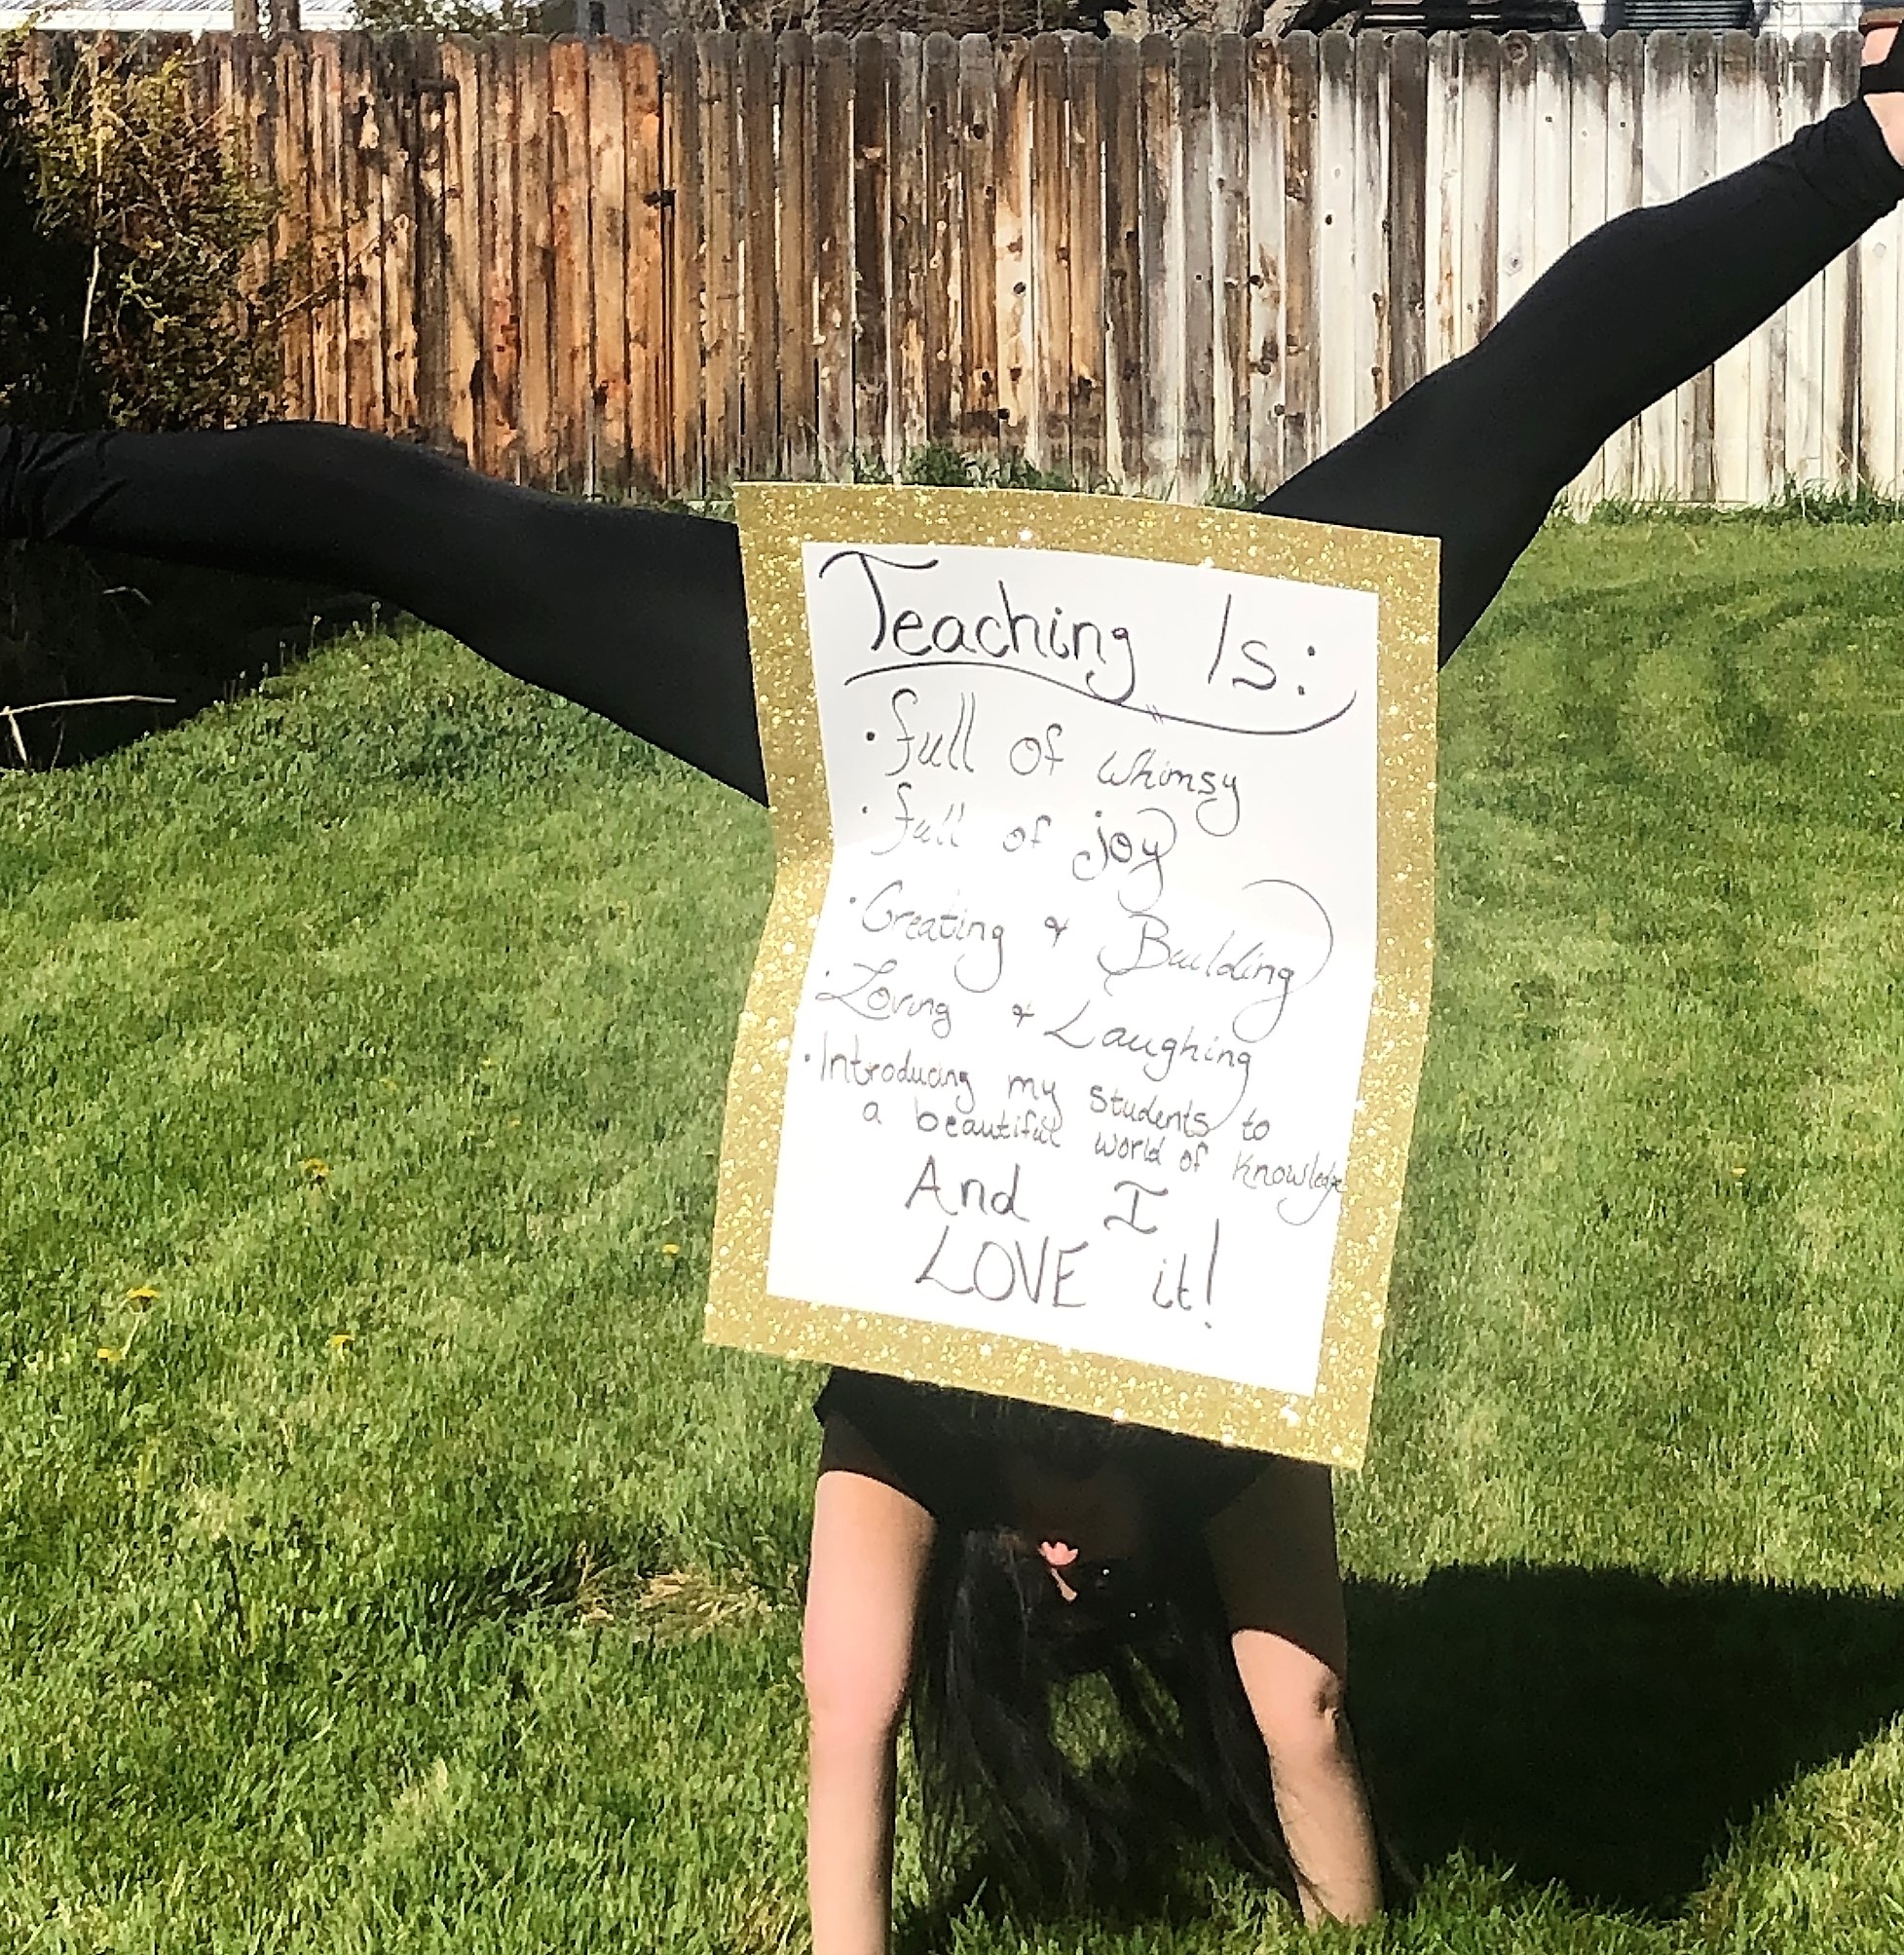 person doing a handstand with a sign that reads: Teaching is: Full of Whimsy   Full of Joy  Creating & Building  Loving & Laughing  Introducing my students to a beautiful world of knowledge 